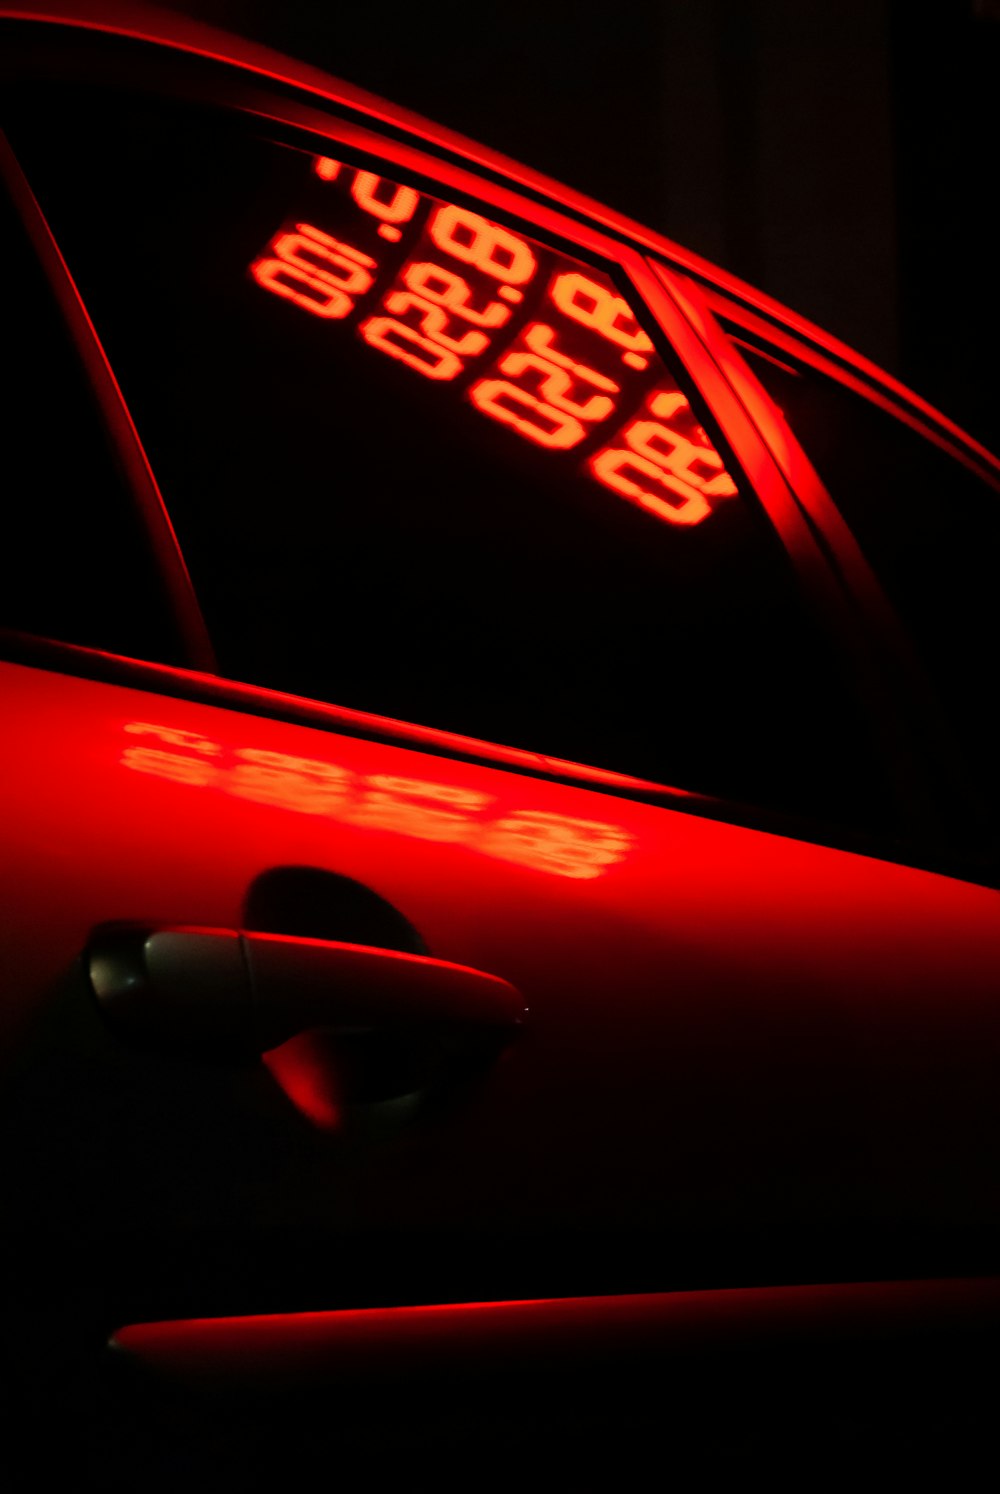 a close up of a red car with a speed limit sign